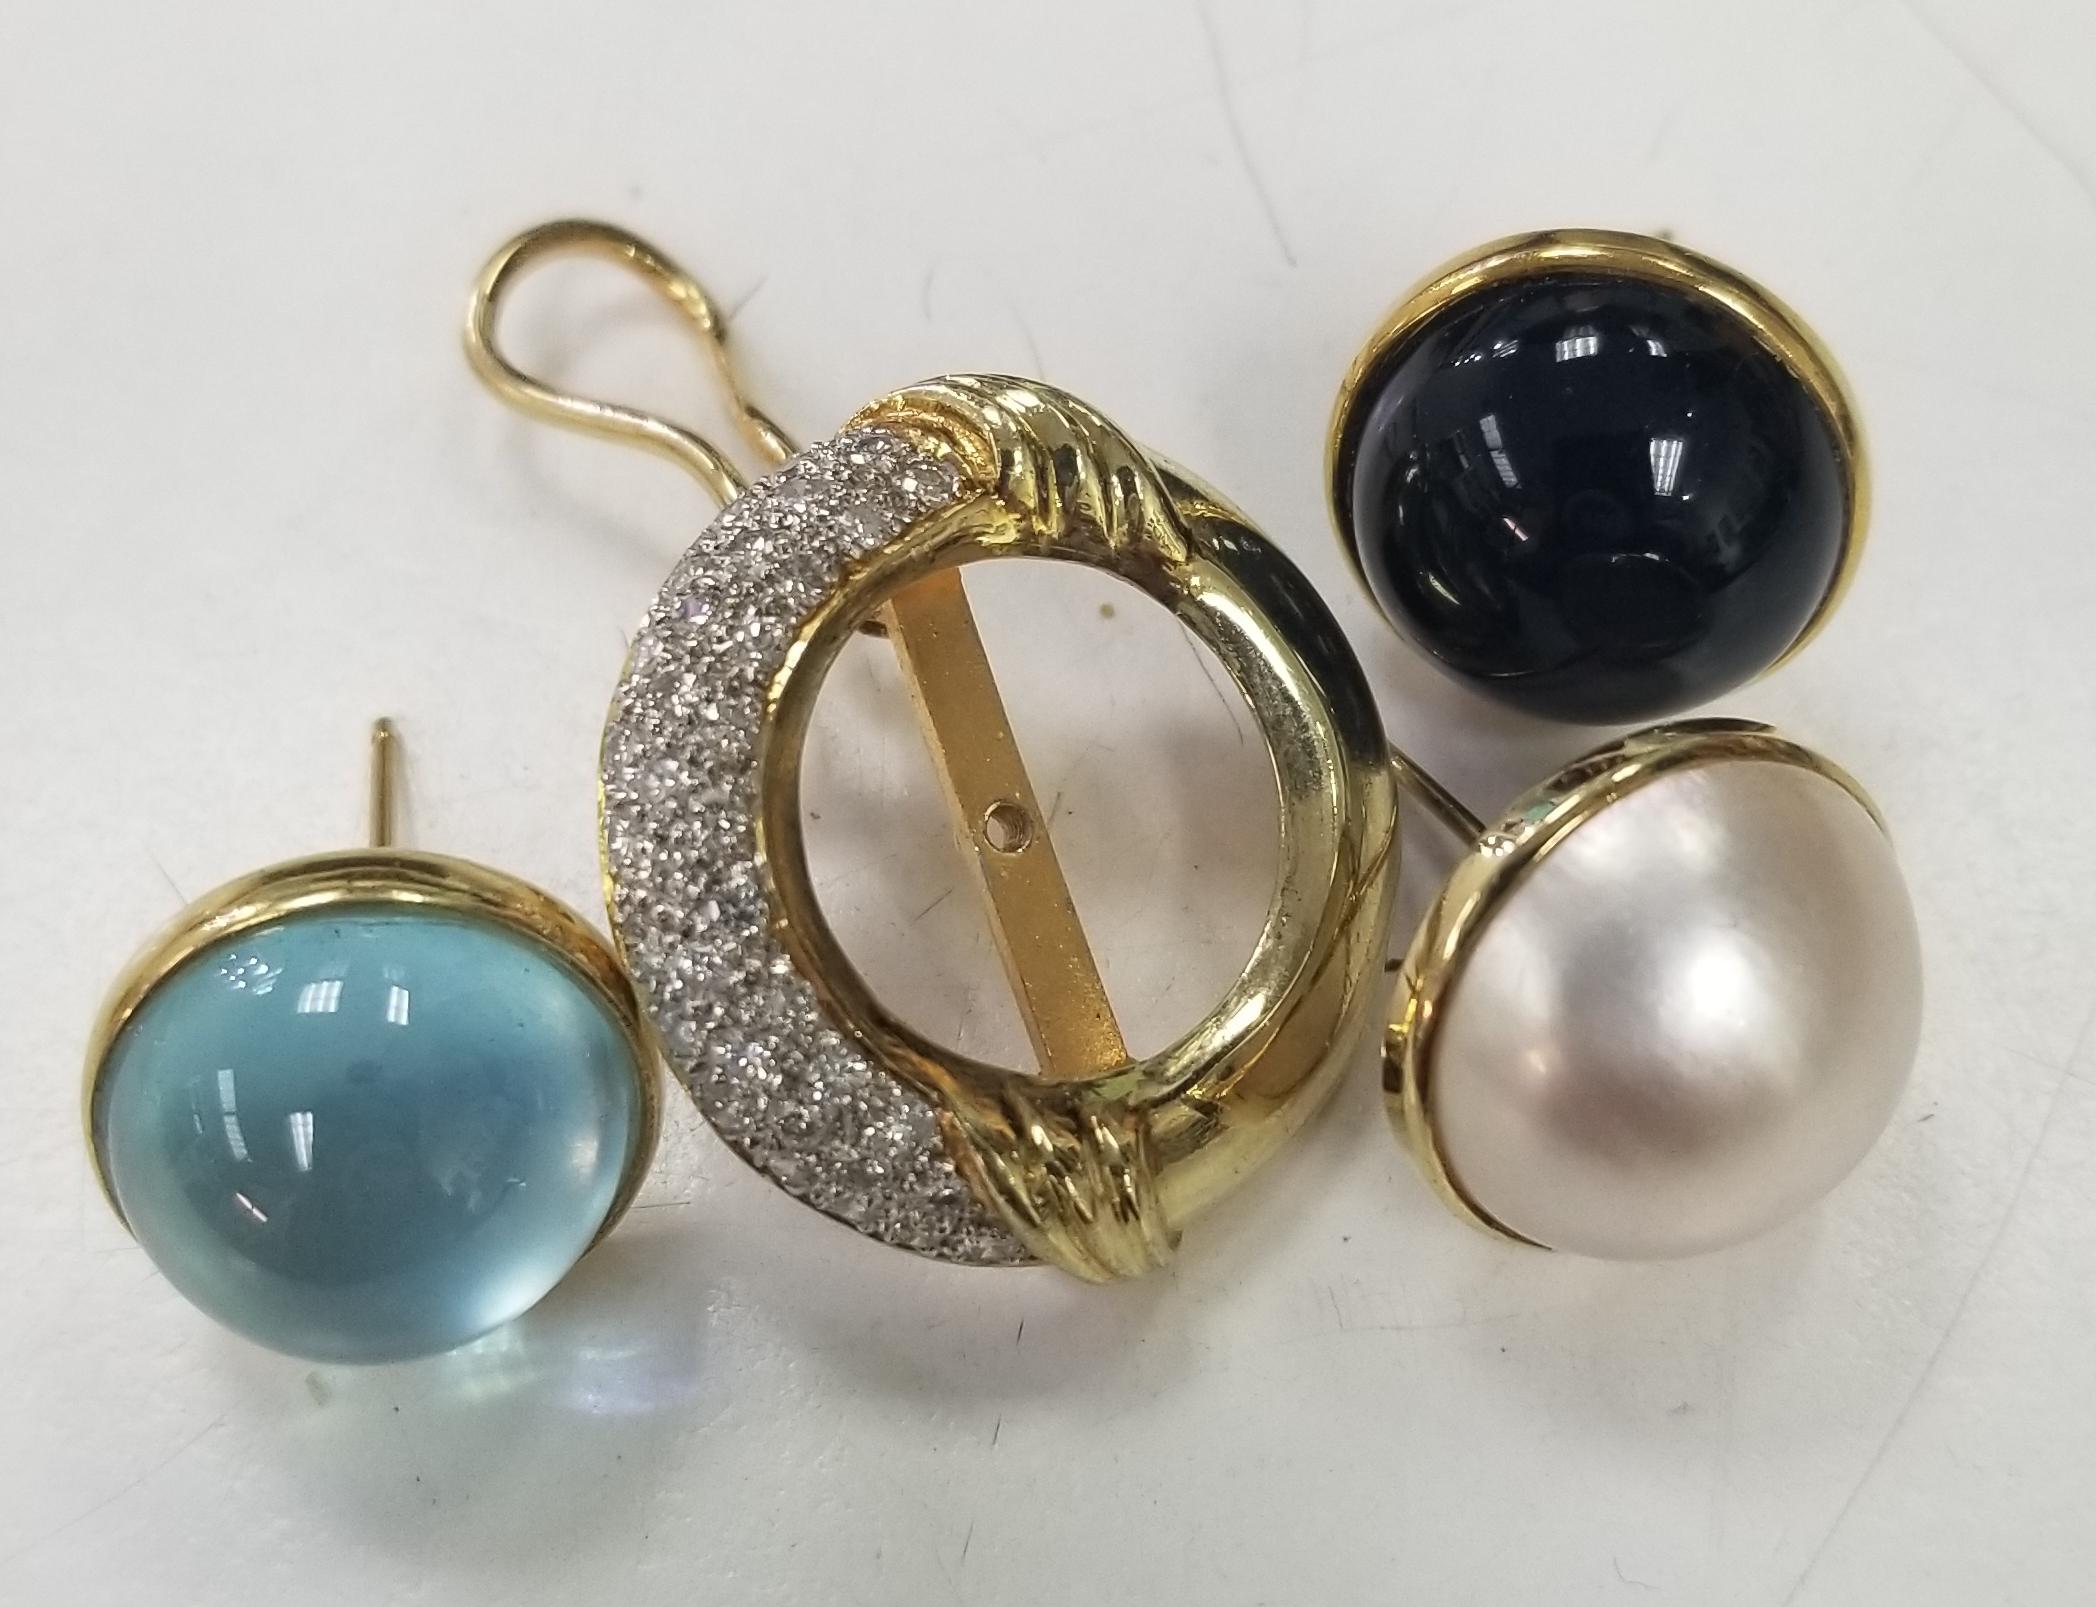 14K yellow gold earrings with diamonds and interchangeable Mabe pearl, Blue Topaz and Black Onyx 16.5mm
Specifications:
    MAIN stone:  Mabe pearl, Blue Topaz and Black Onyx 16.5mm
    DIAMONDS: 72 pcs round full cut natural diamonds
    CARAT